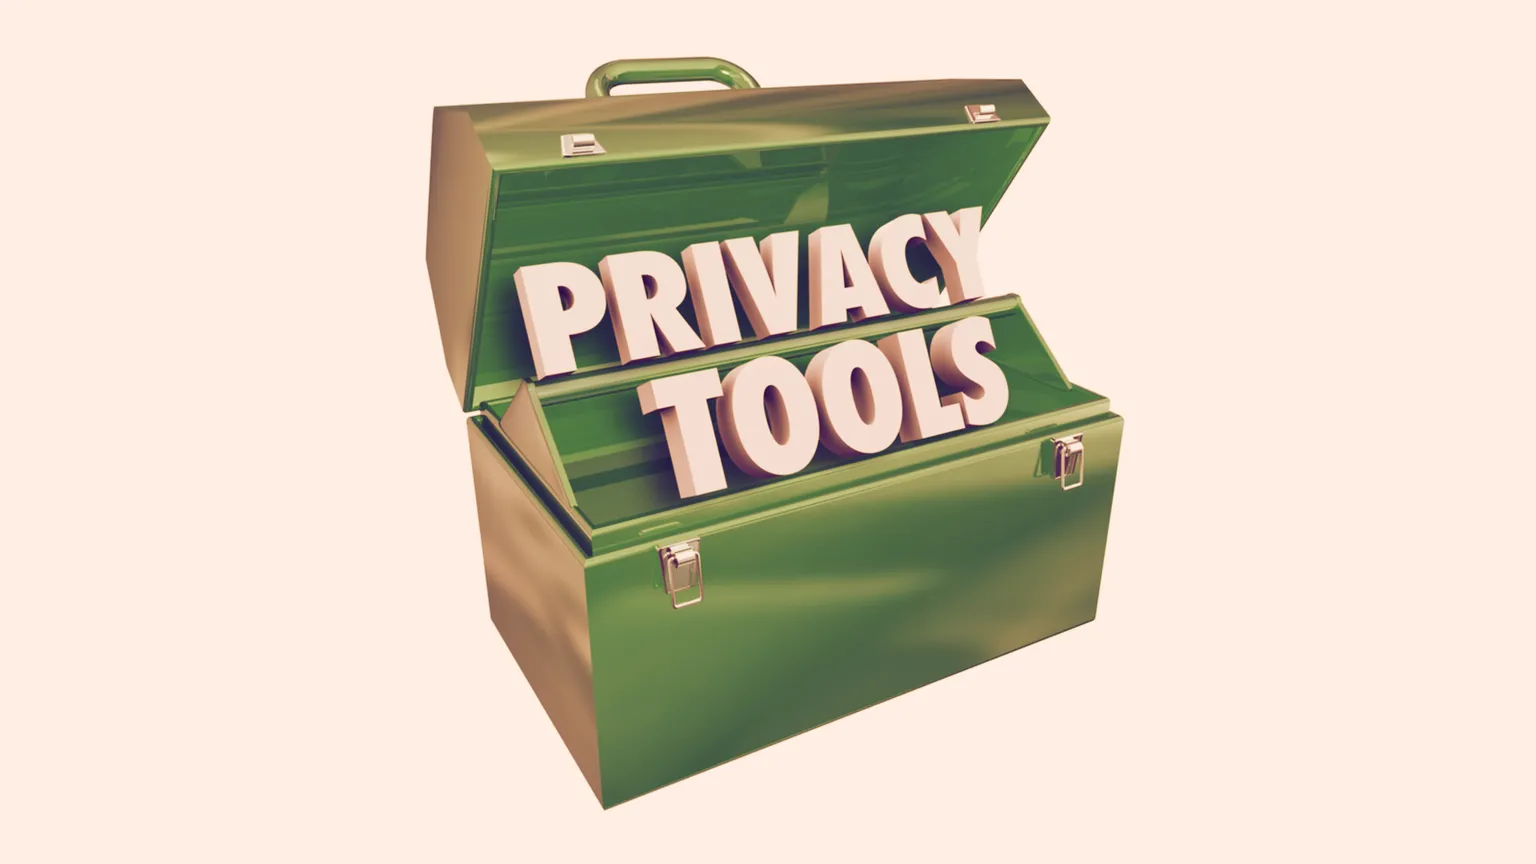 Here's your DeFi privacy toolbox